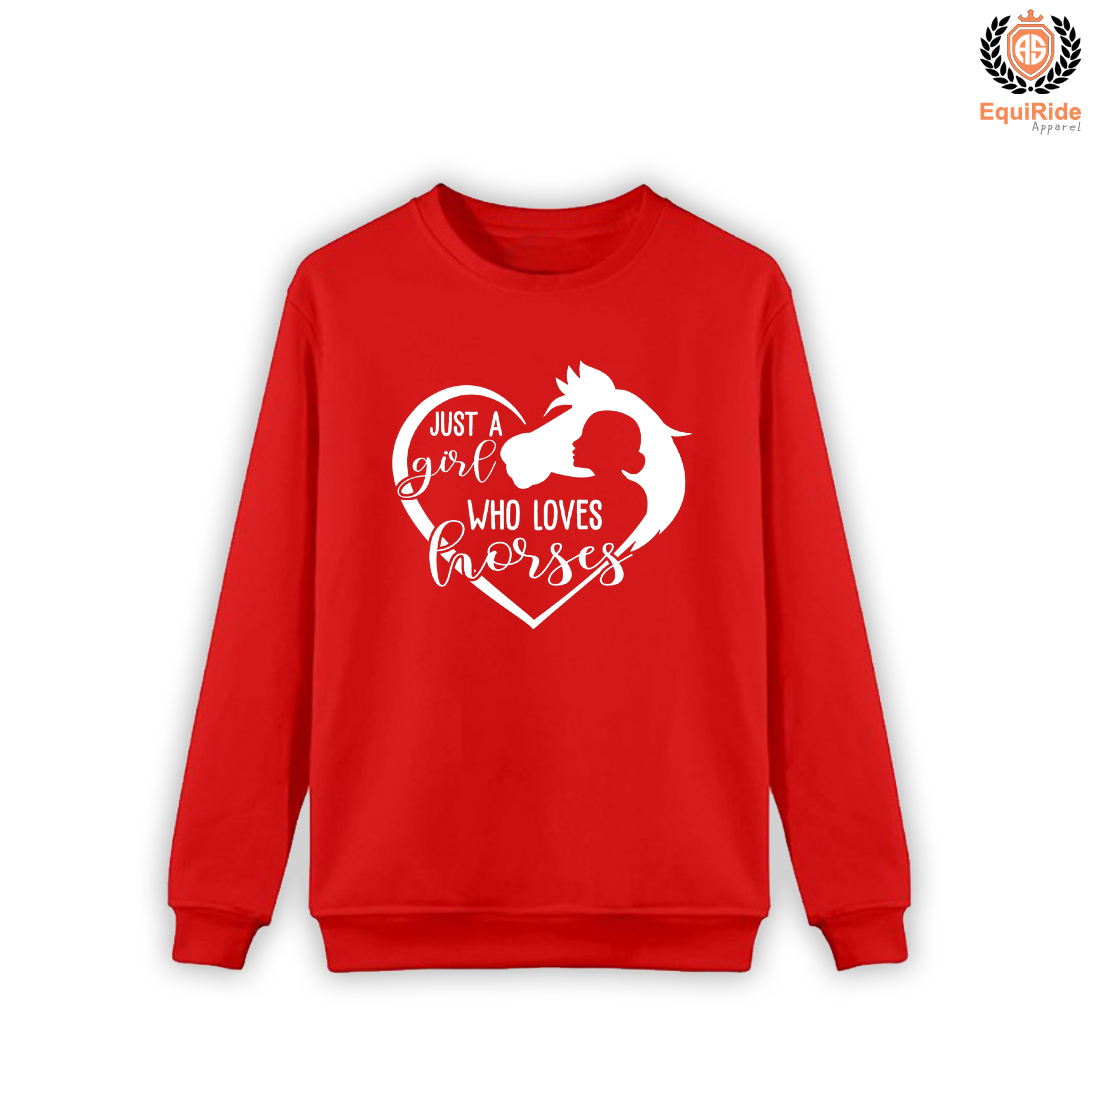 Just A Girl Who Loves Horses Sweater Equestrian Fashion Sweatshirts CRW-SWS-106